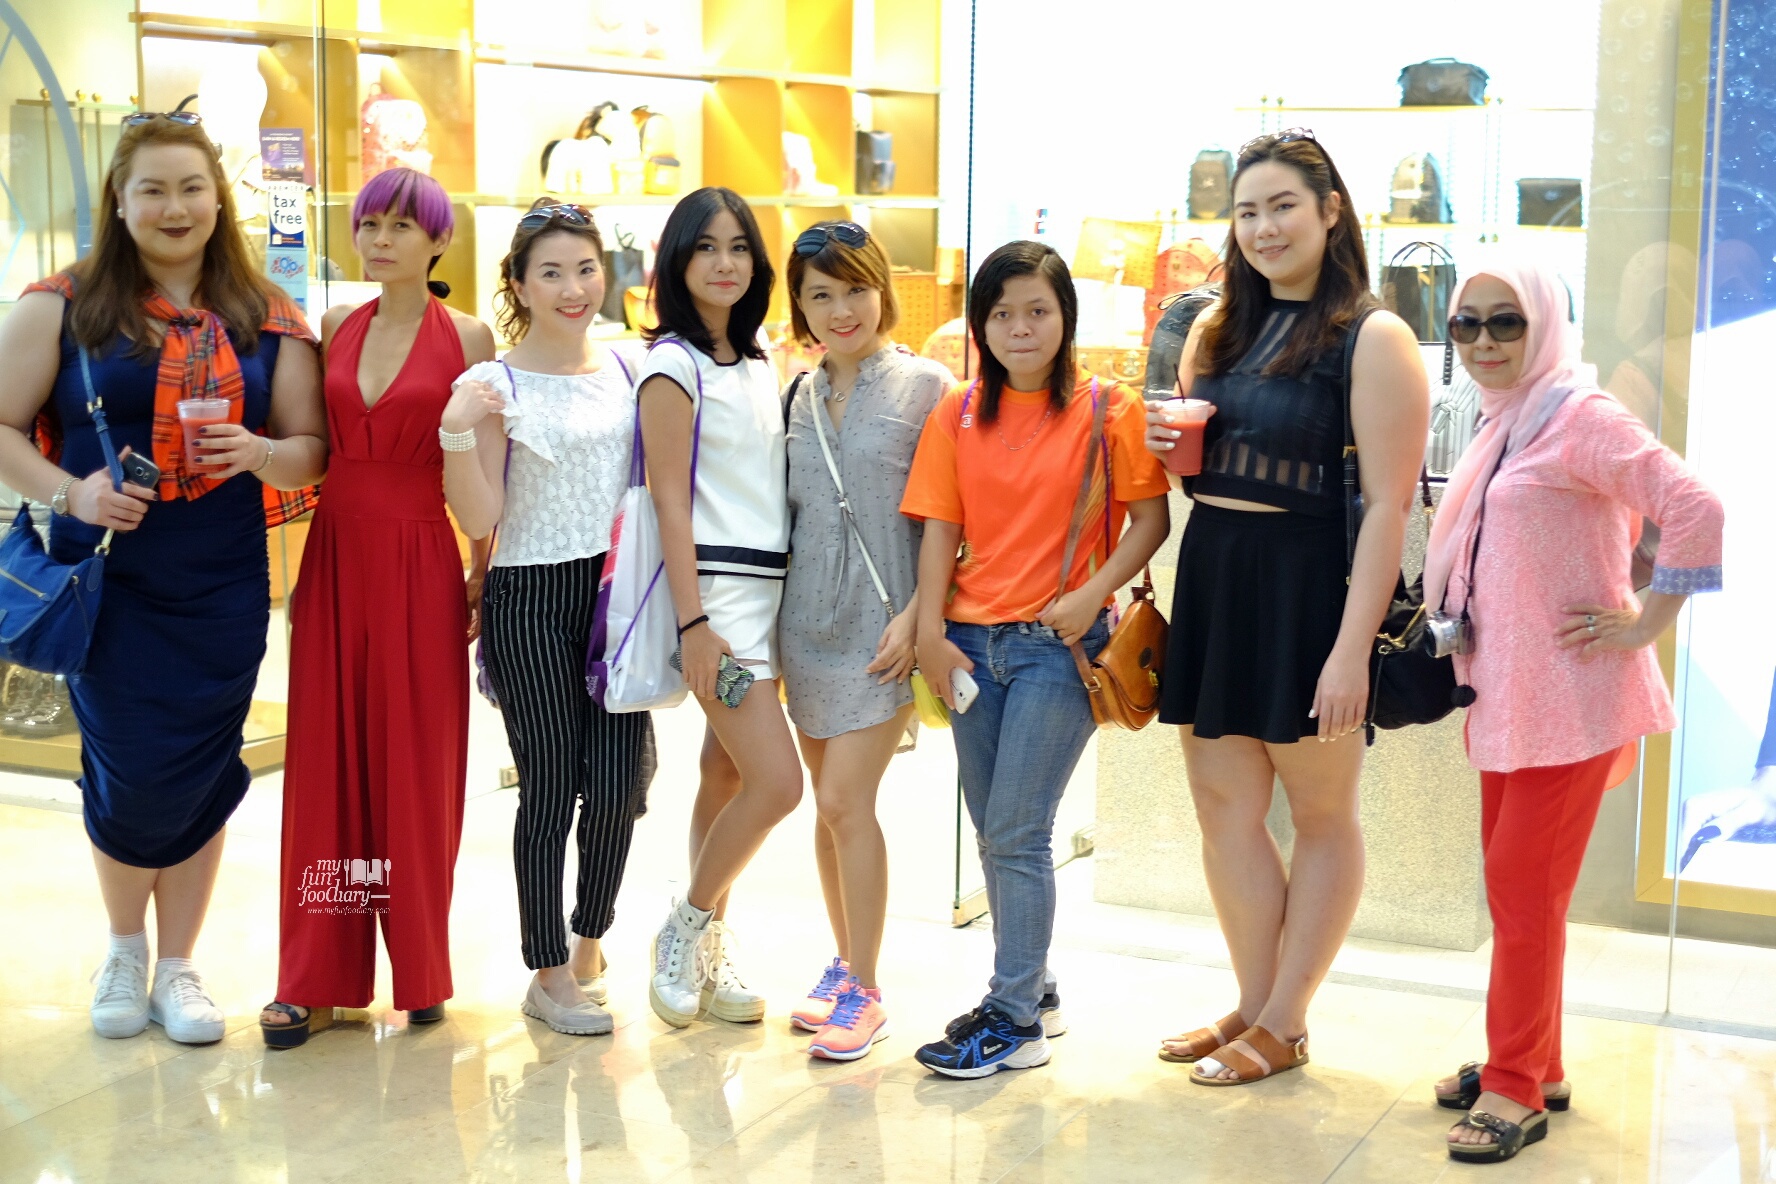 Me and Anisa together with the other bloggers at Marina Bay Sands by Myfunfoodiary